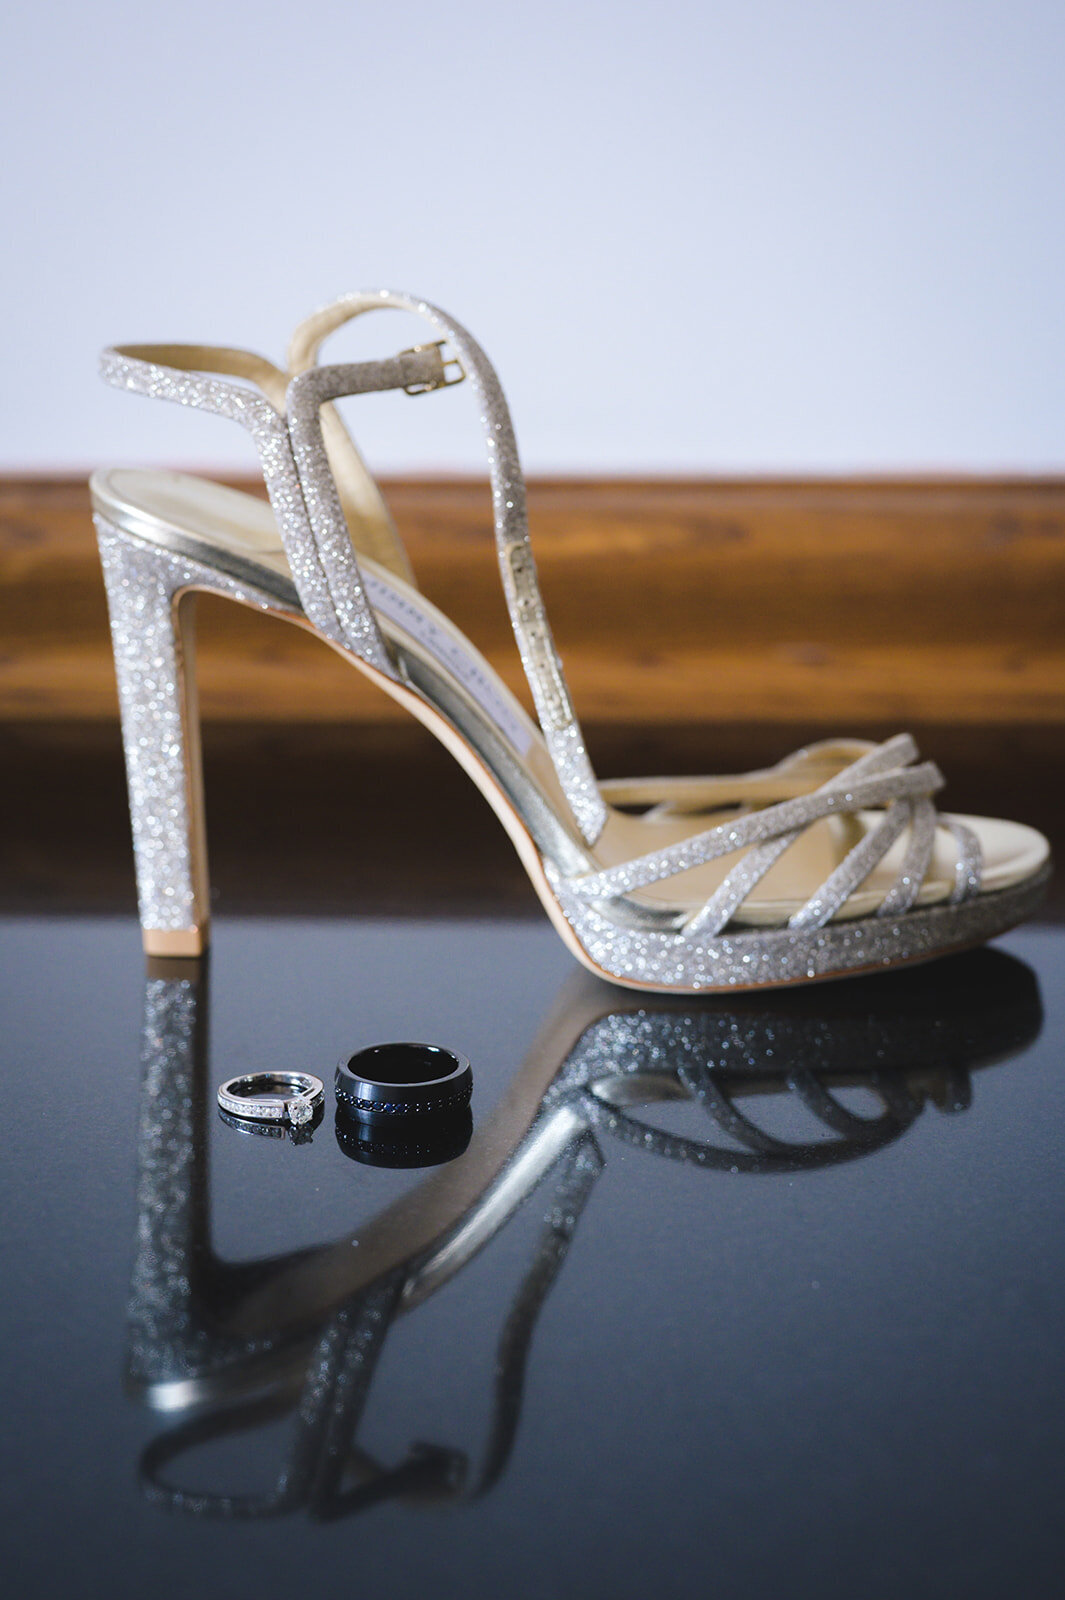 Wedding shoe and rings